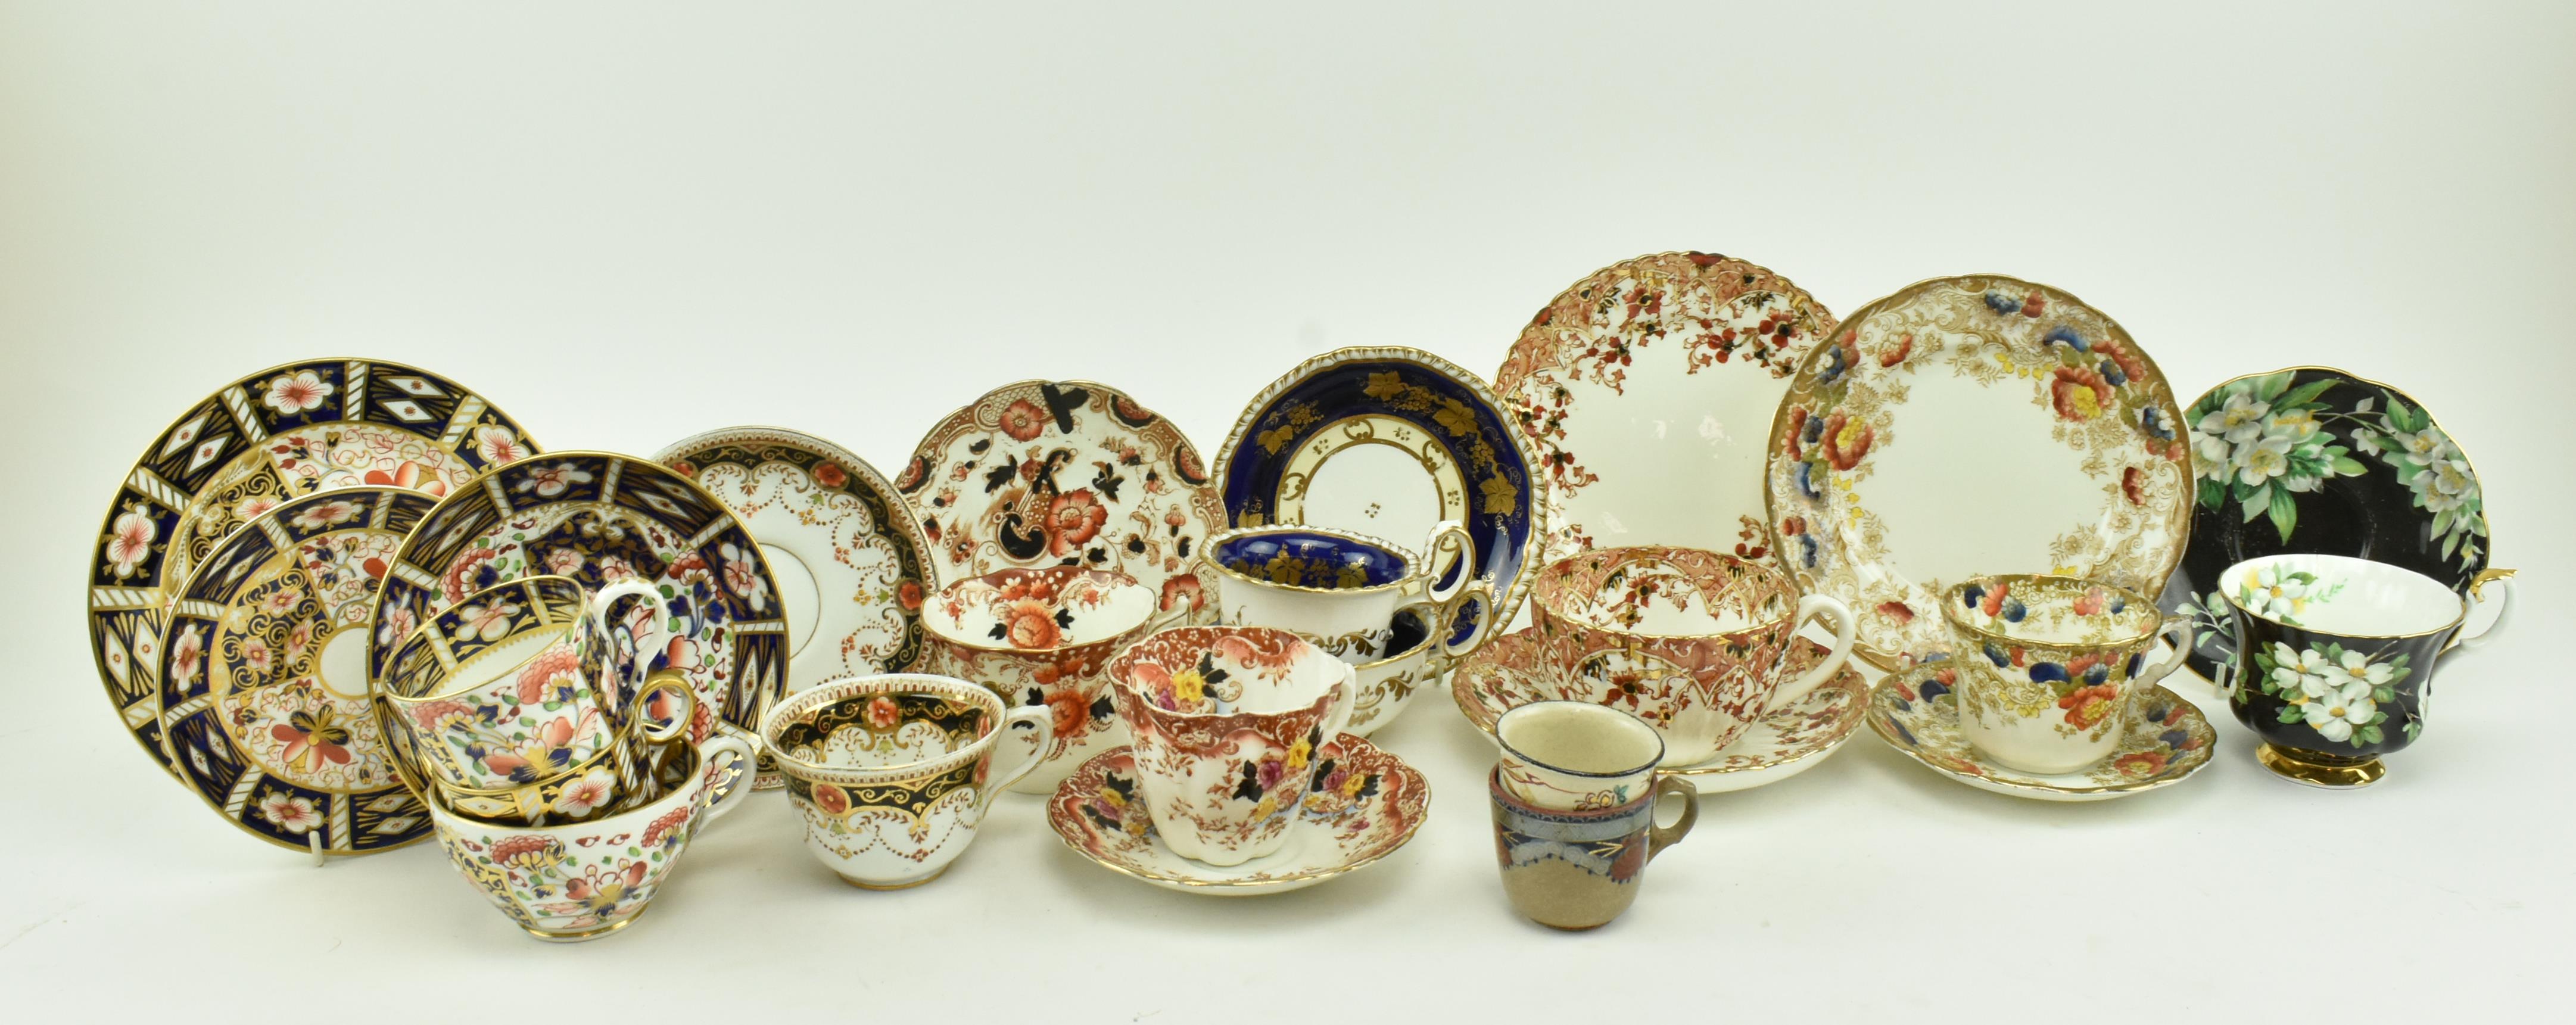 COLLECTION OF 19TH CENTURY PORCELAIN TEACUPS & SAUCERS